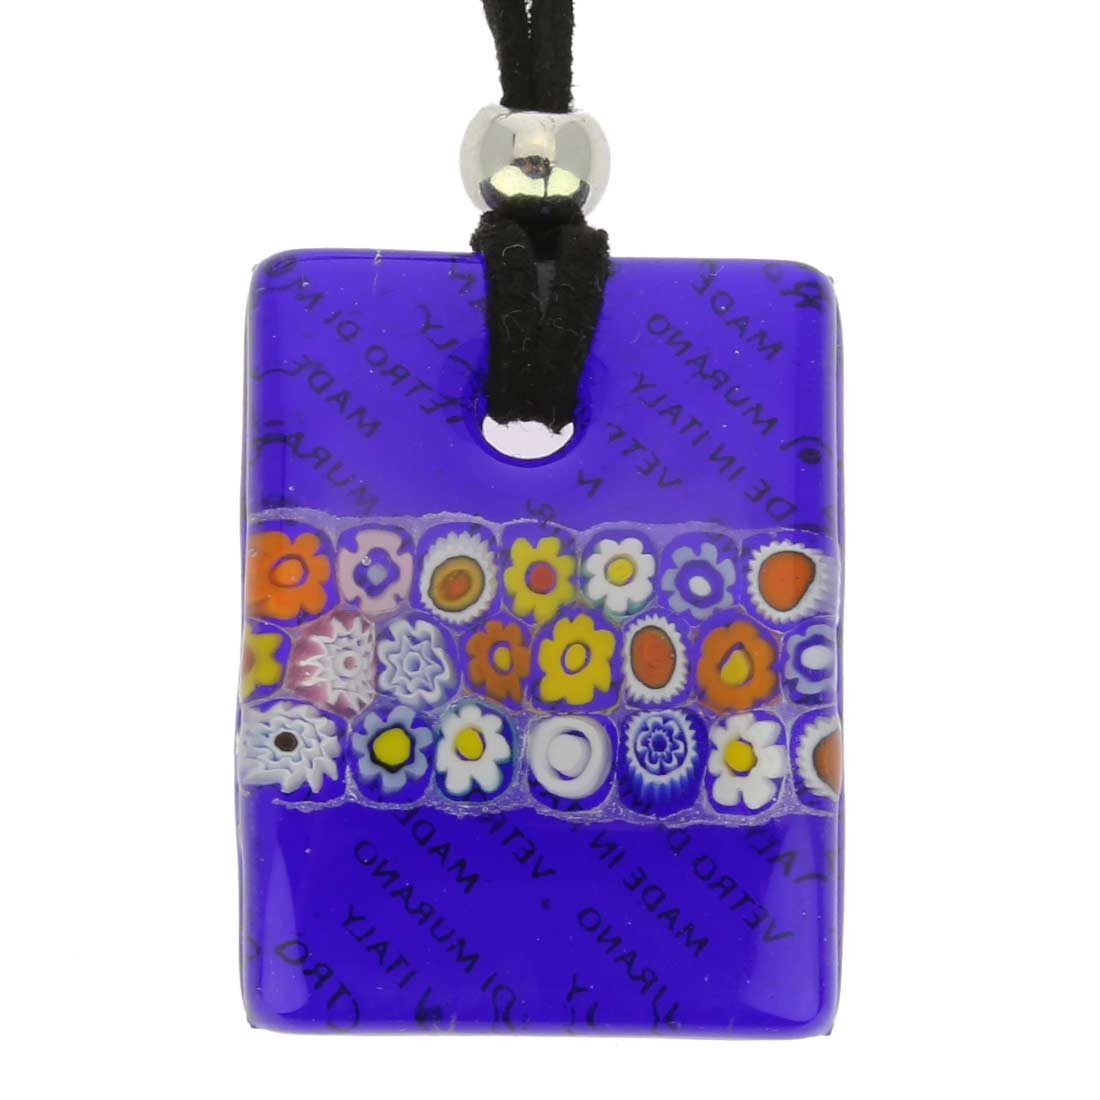 Murano Glass Millefiori Blue Necklace and Earrings Set